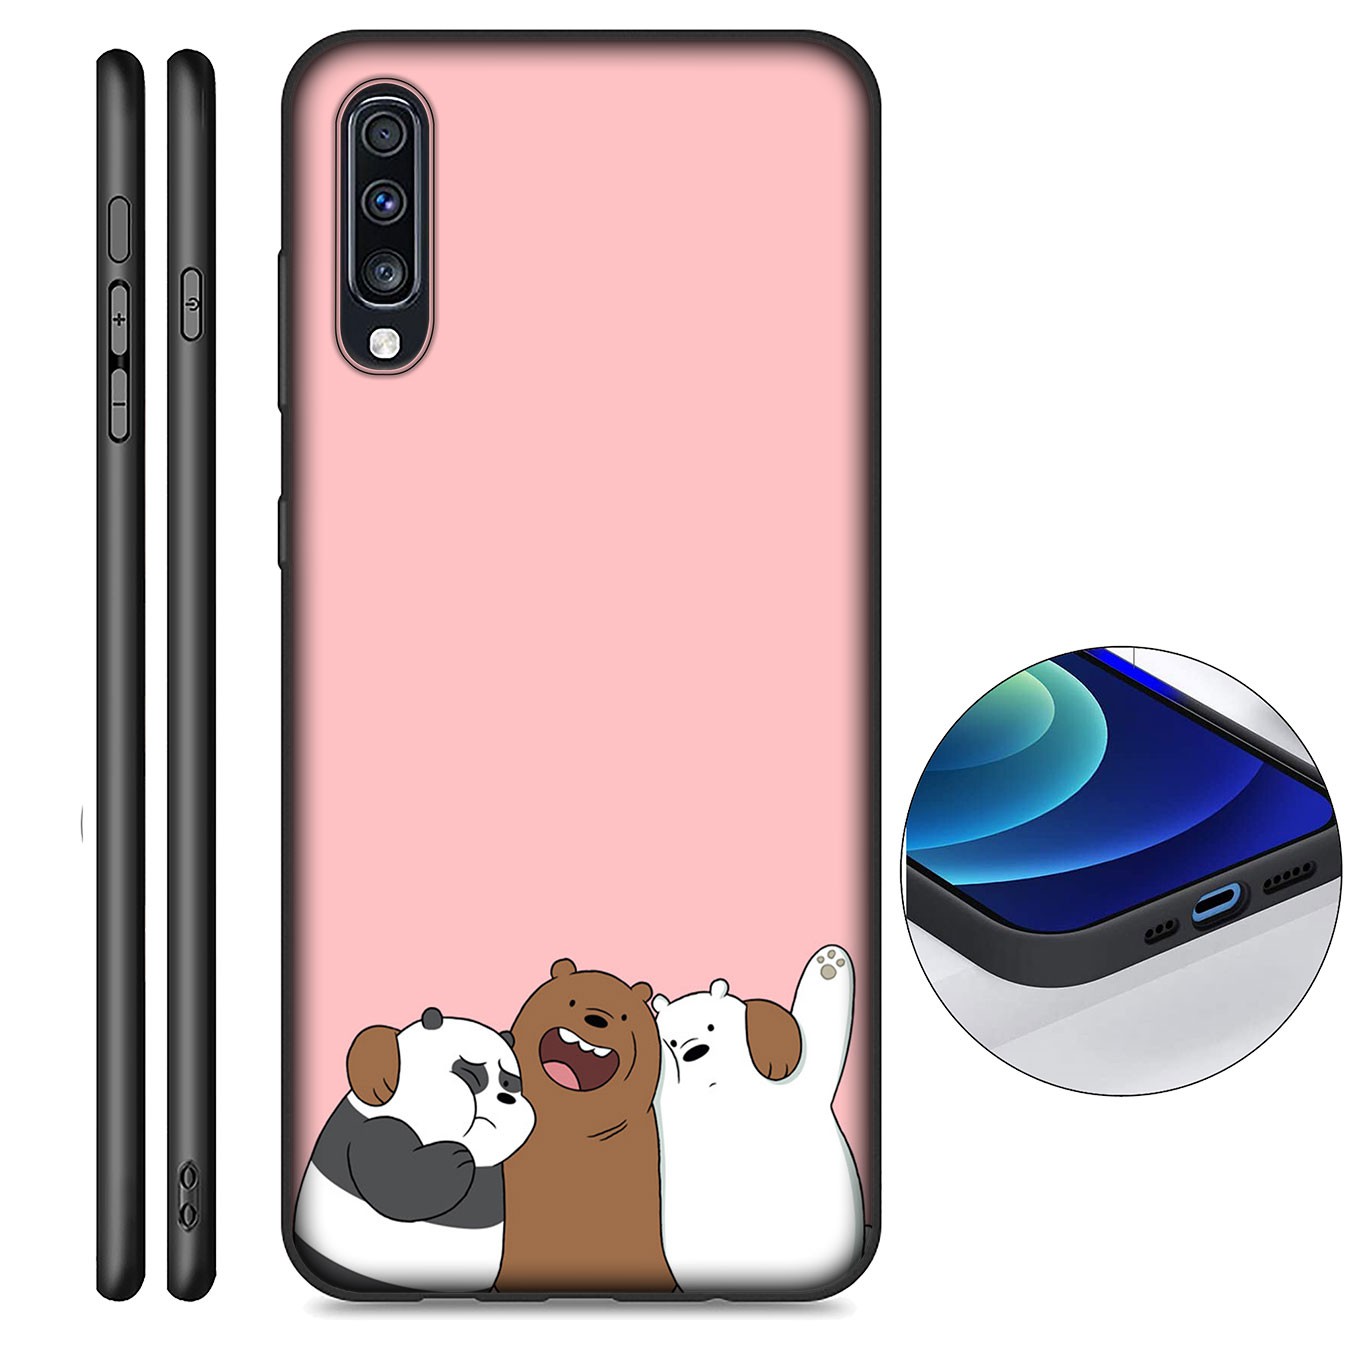 Samsung Galaxy A02S J2 J4 J5 J6 Plus J7 Prime A02 M02 j6+ A42 + Casing Soft Silicone Phone Case H23 Comic We Bare Bears Cover